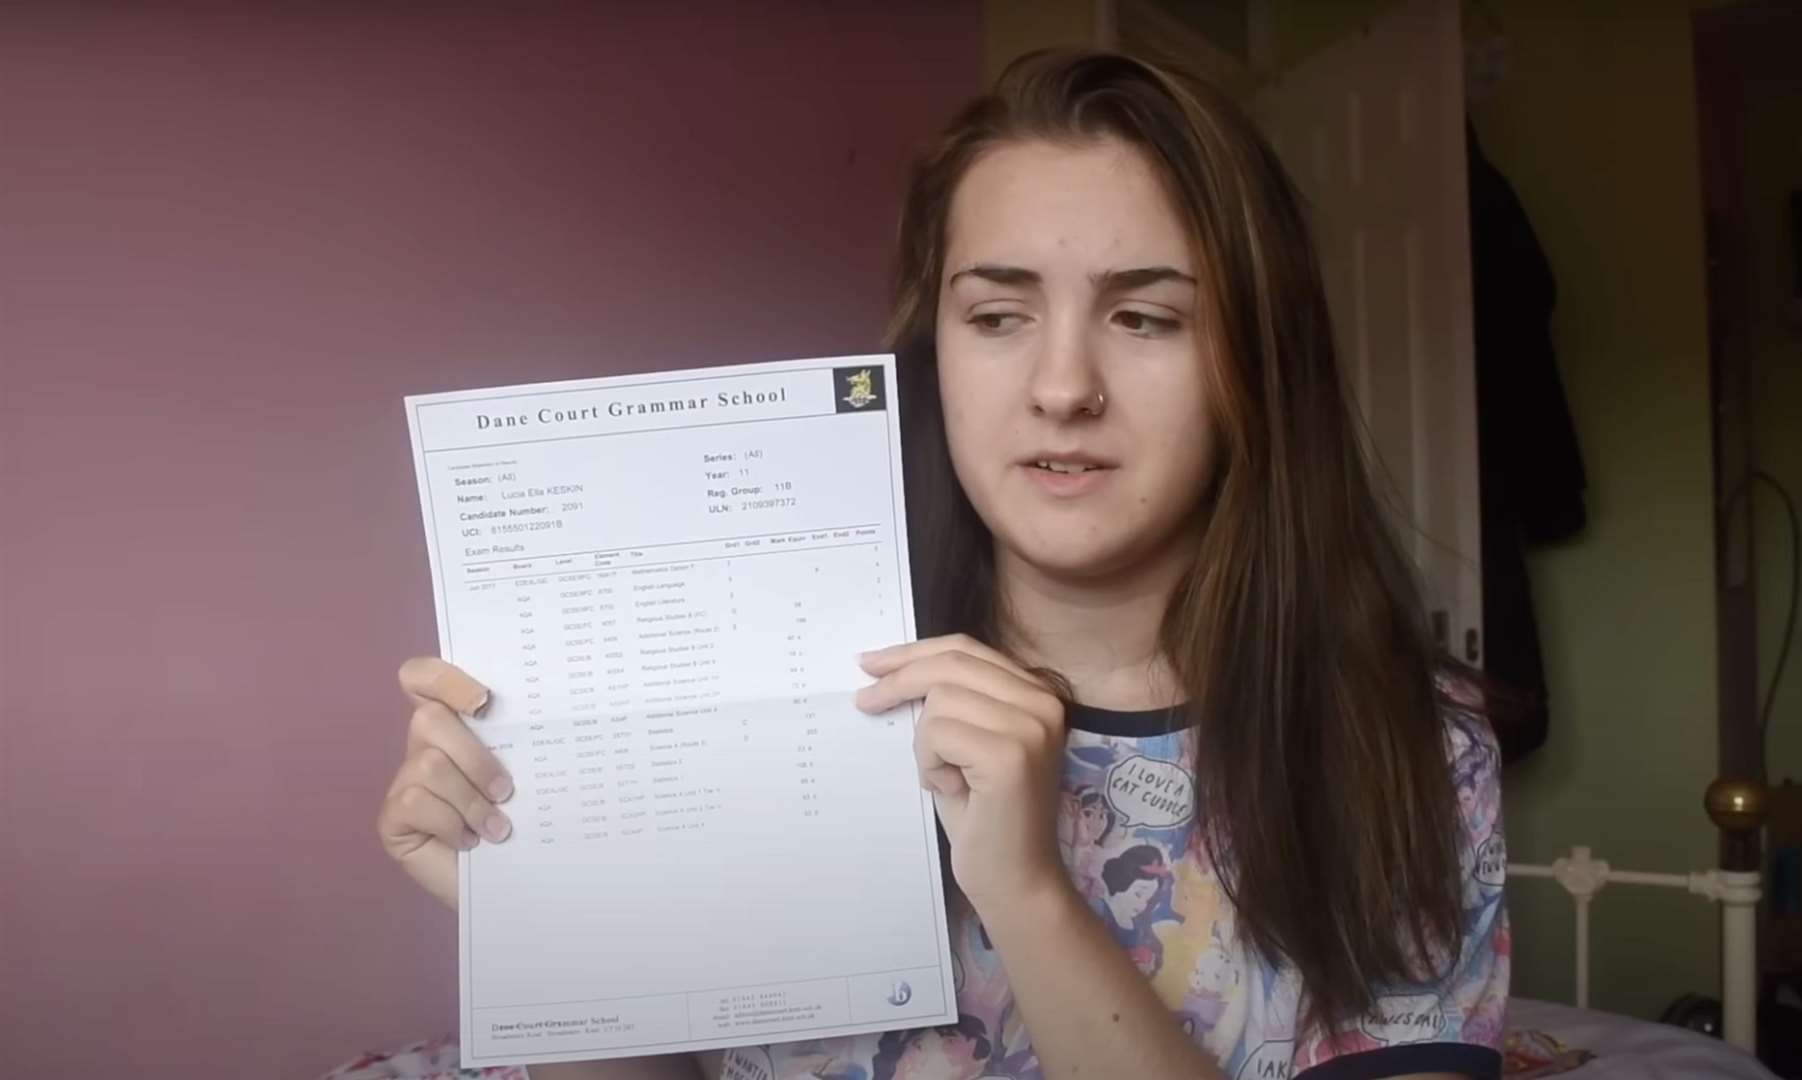 Lucia revealing her disappointing GCSE results on YouTube aged 16. Picture: Chi with a C/YouTube